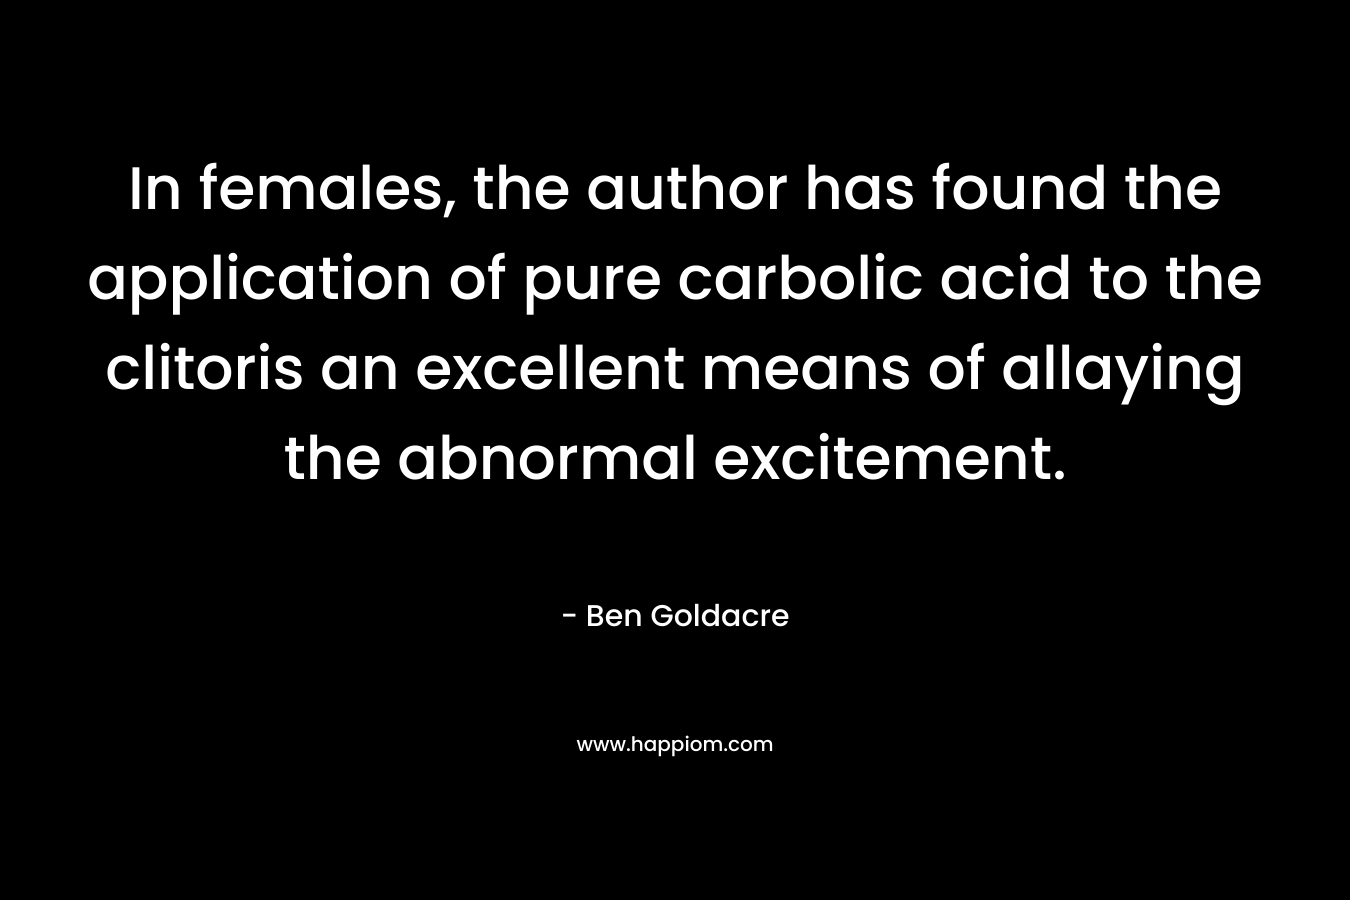 In females, the author has found the application of pure carbolic acid to the clitoris an excellent means of allaying the abnormal excitement.